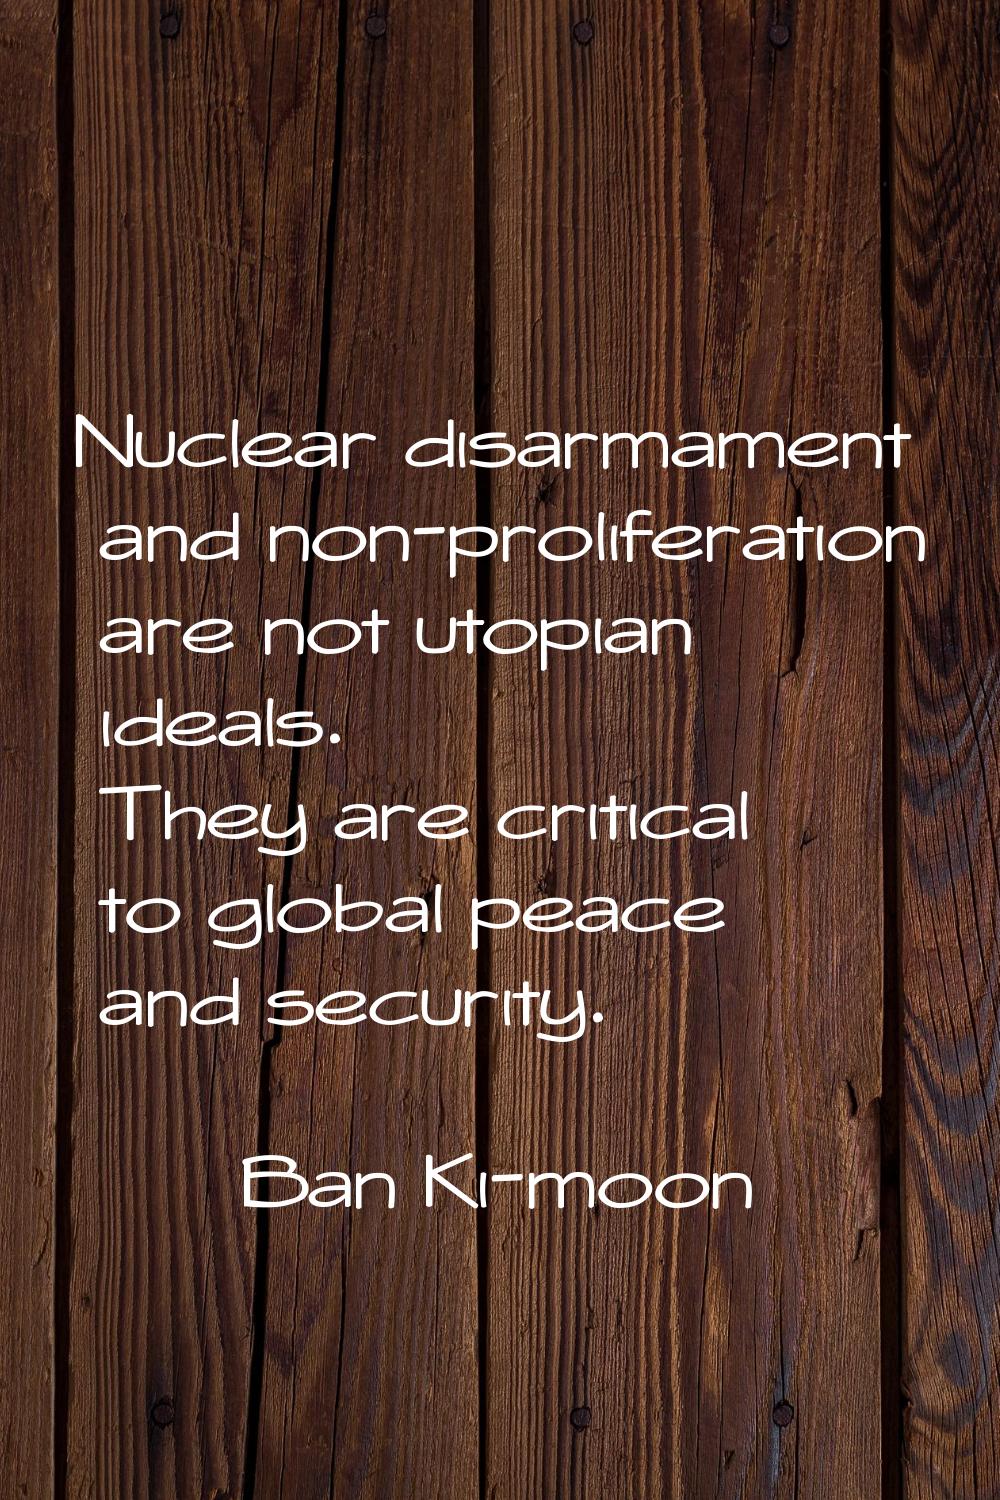 Nuclear disarmament and non-proliferation are not utopian ideals. They are critical to global peace